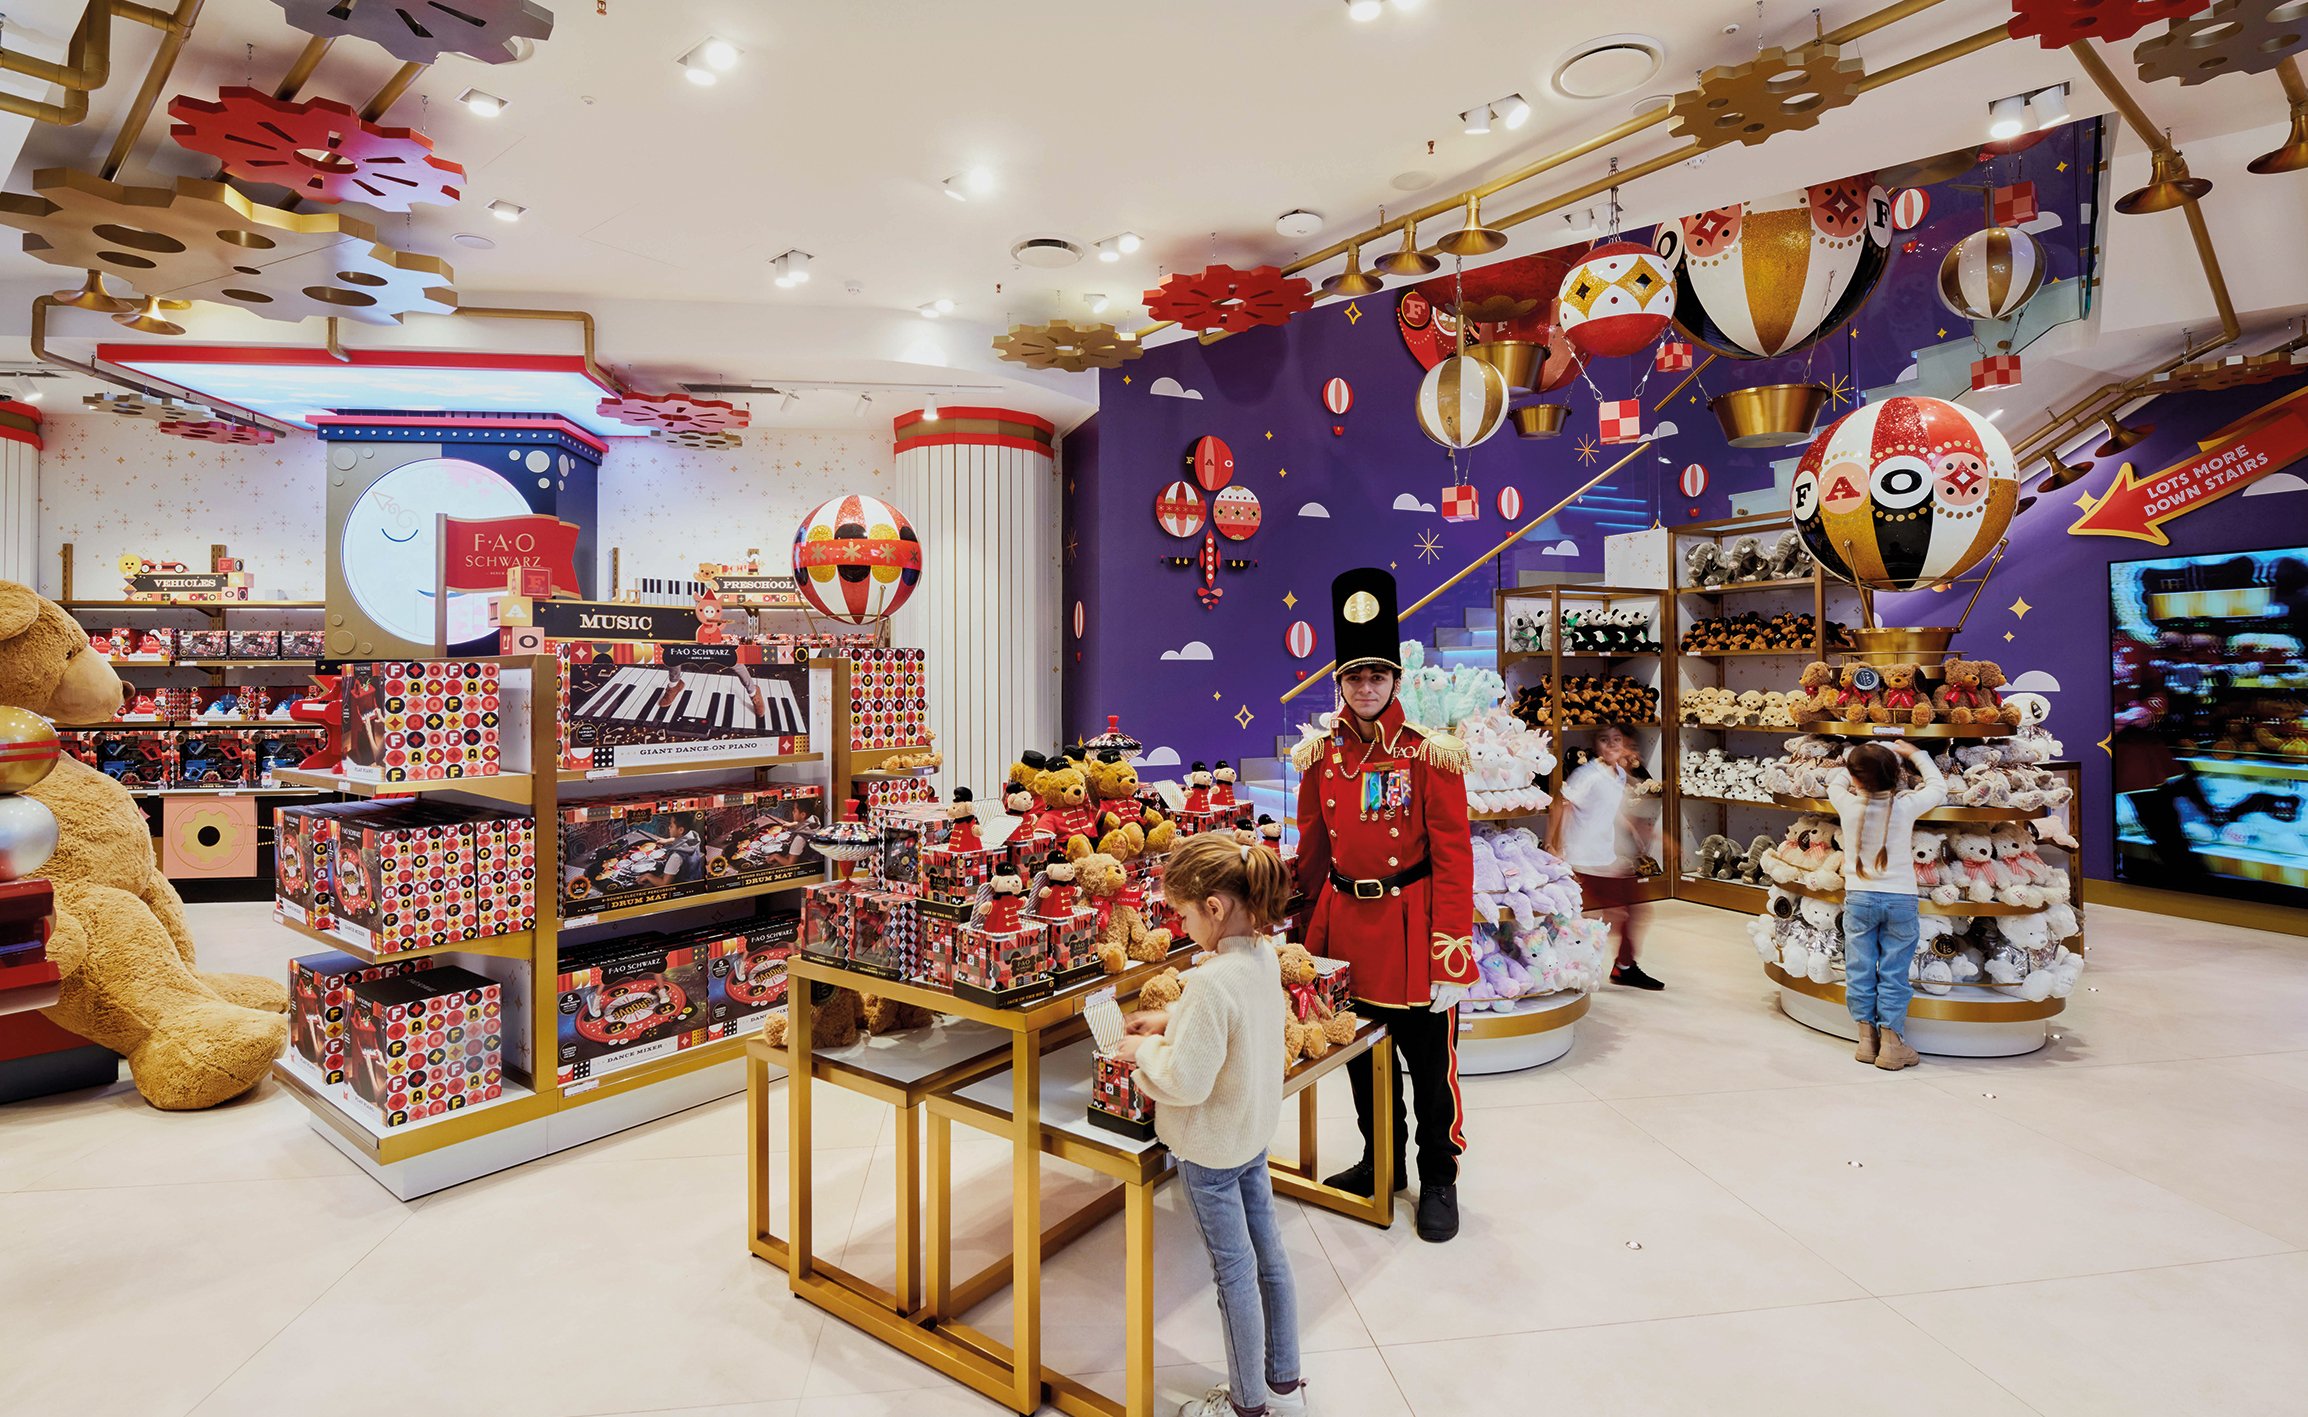 FAO Schwarz on X: 👋 Our friends in Italy! You can now experience the  magic of FAO Schwarz online! Visit  for more.  #FAOSchwarz #Milan #Italy #Toys #Gifts #Gifting  / X